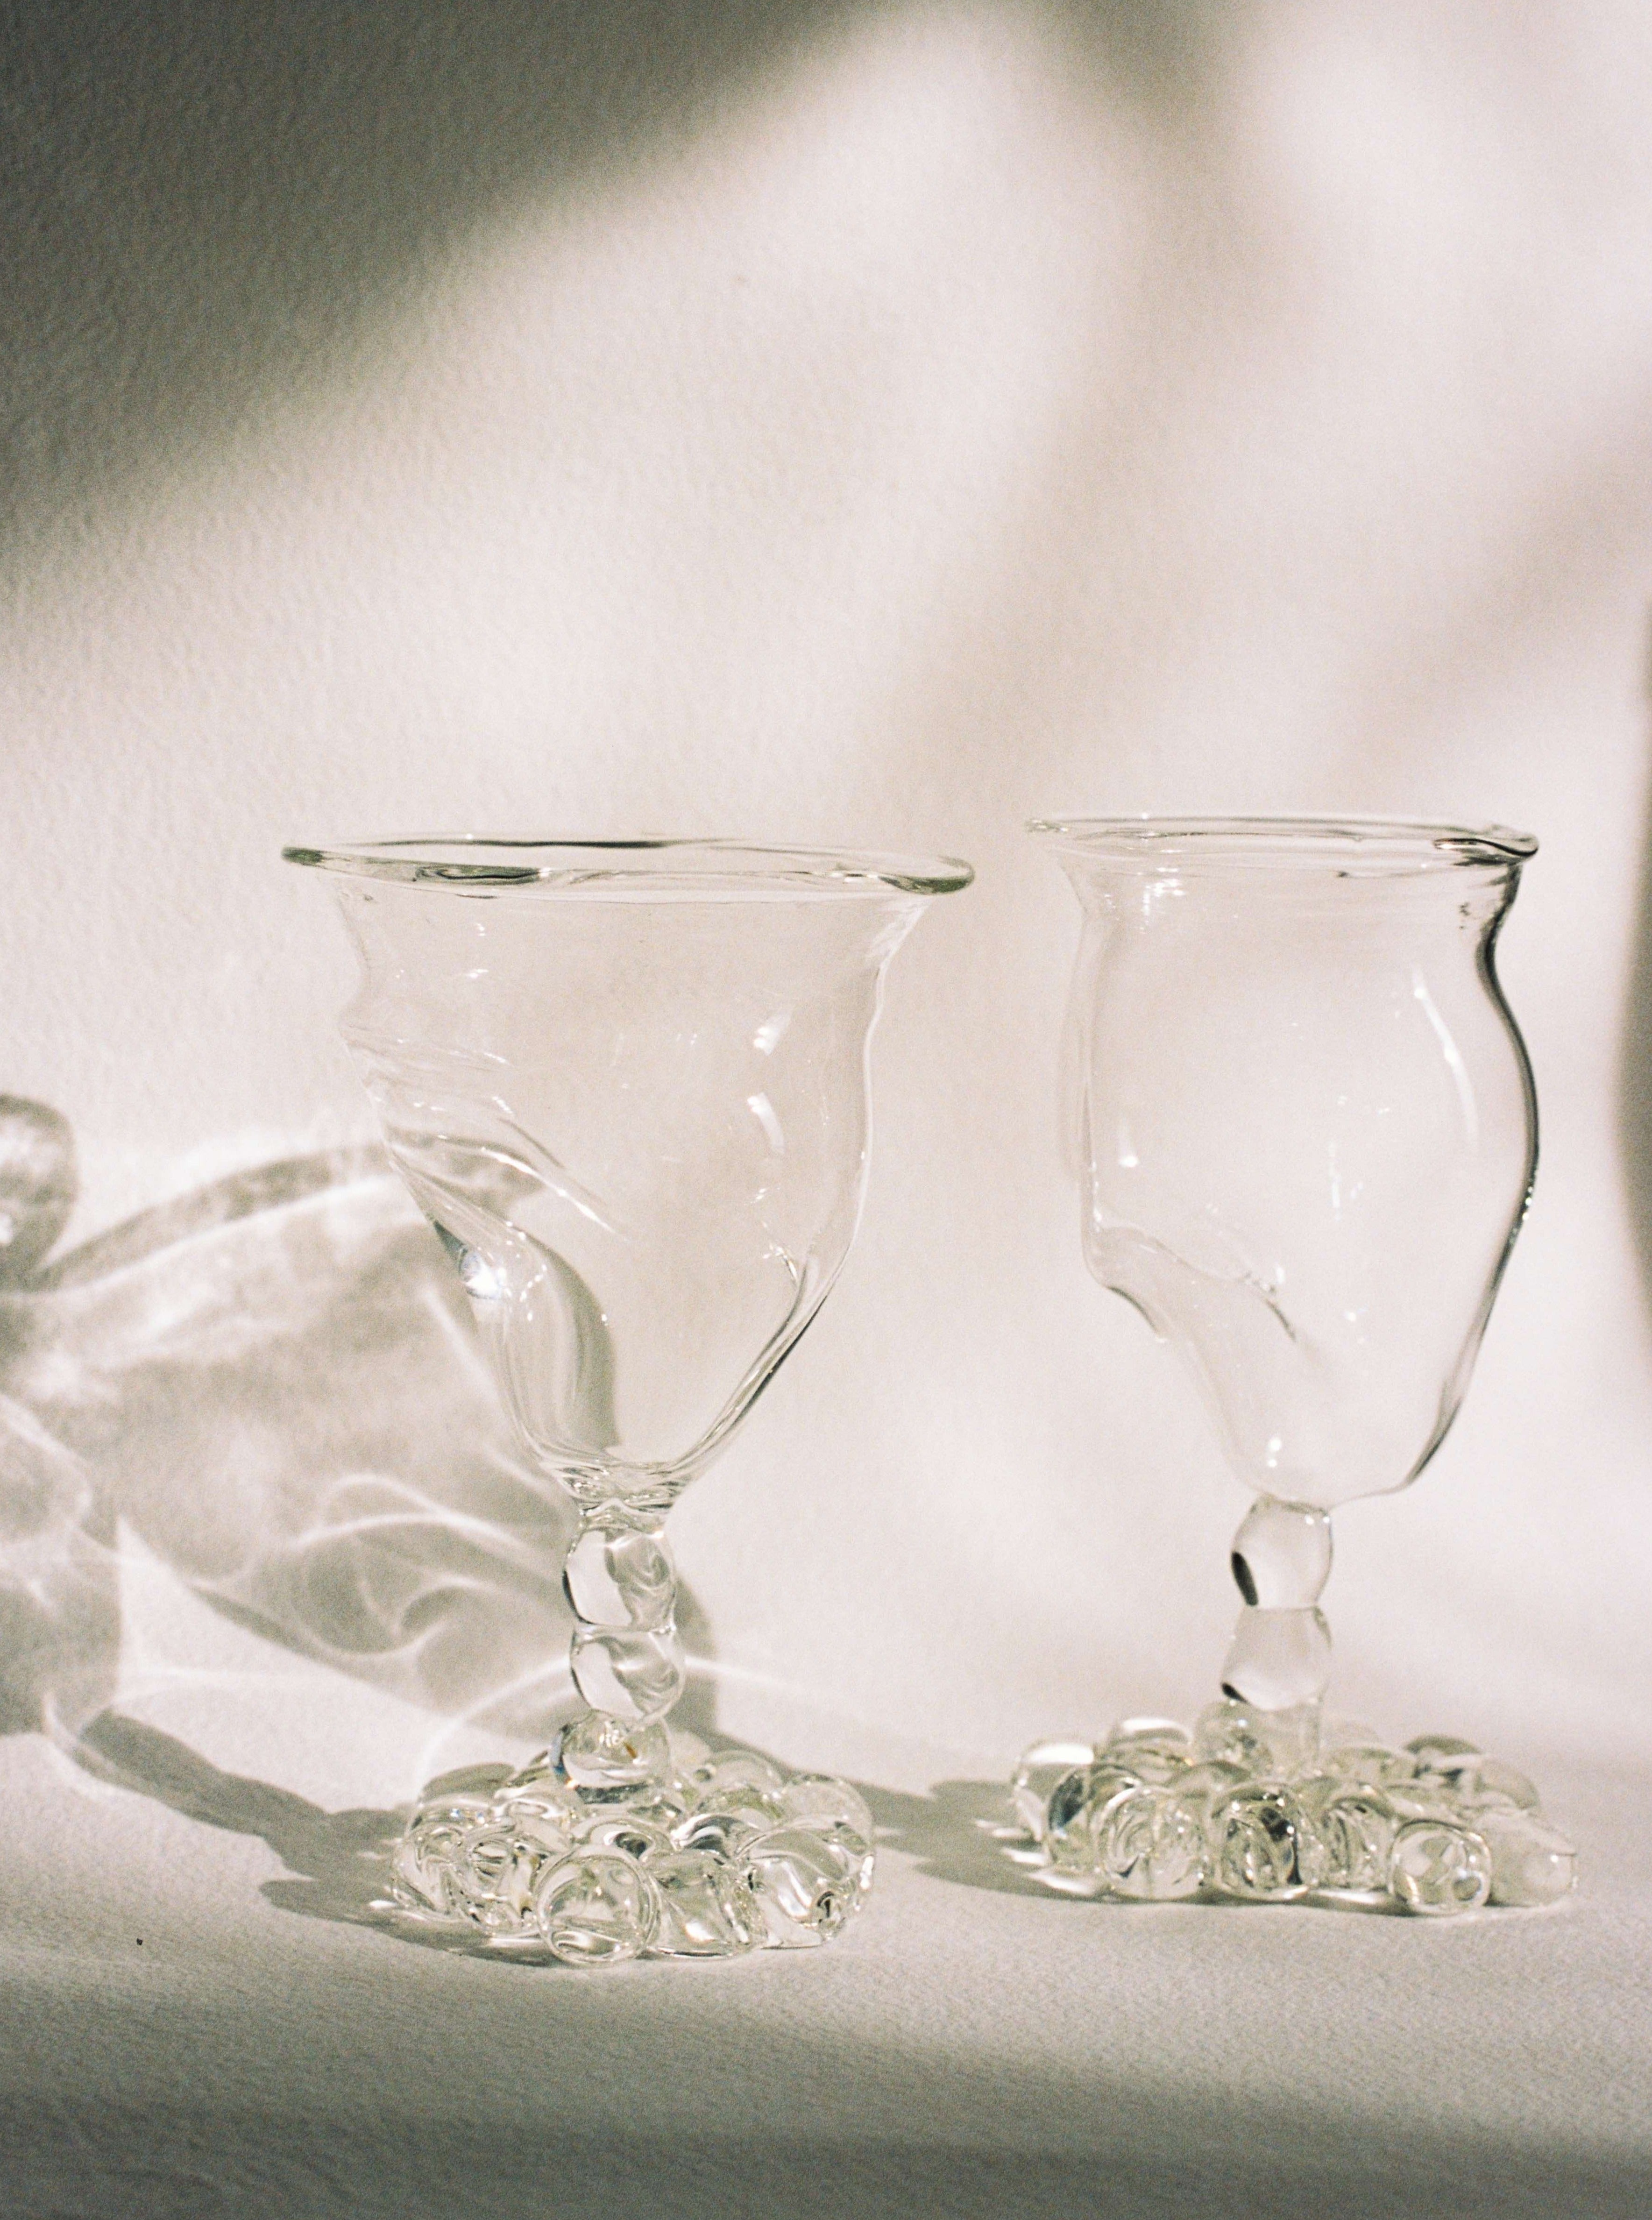 Two Justine Menard Mouthblown Wine Glasses on a table, illuminated by soft light casting shadows, surrounded by scattered clear pebbles, giving a serene and elegant look.